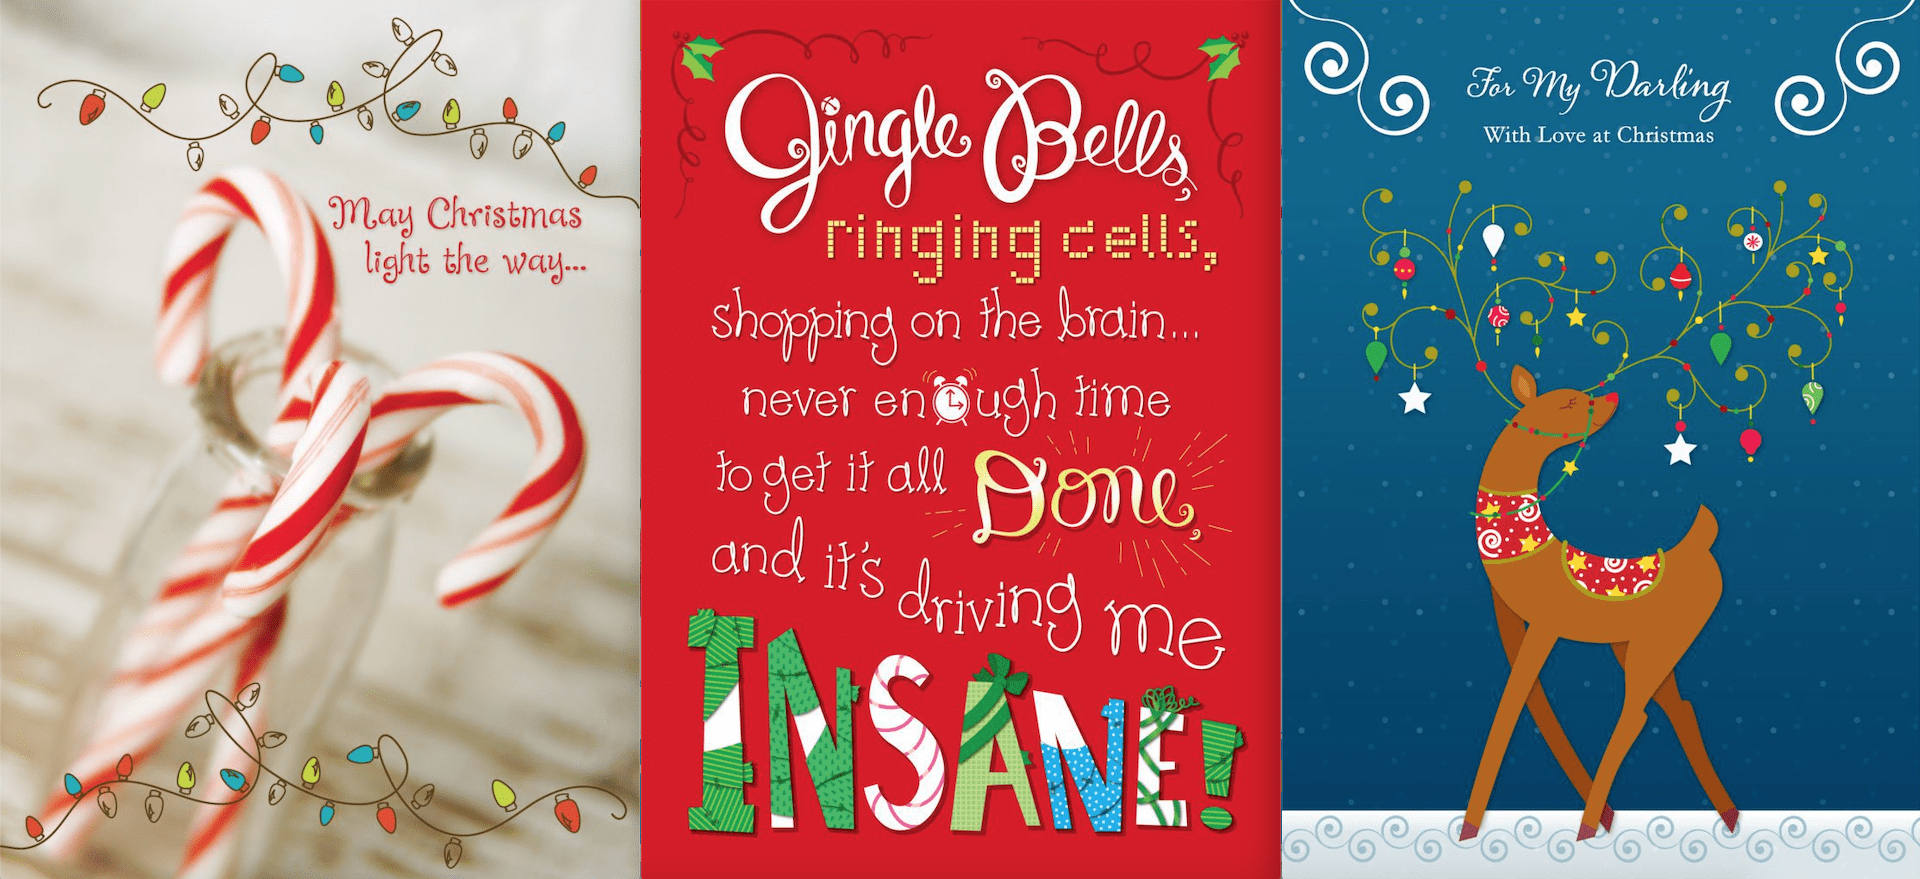 Christmas Greeting Cards for December